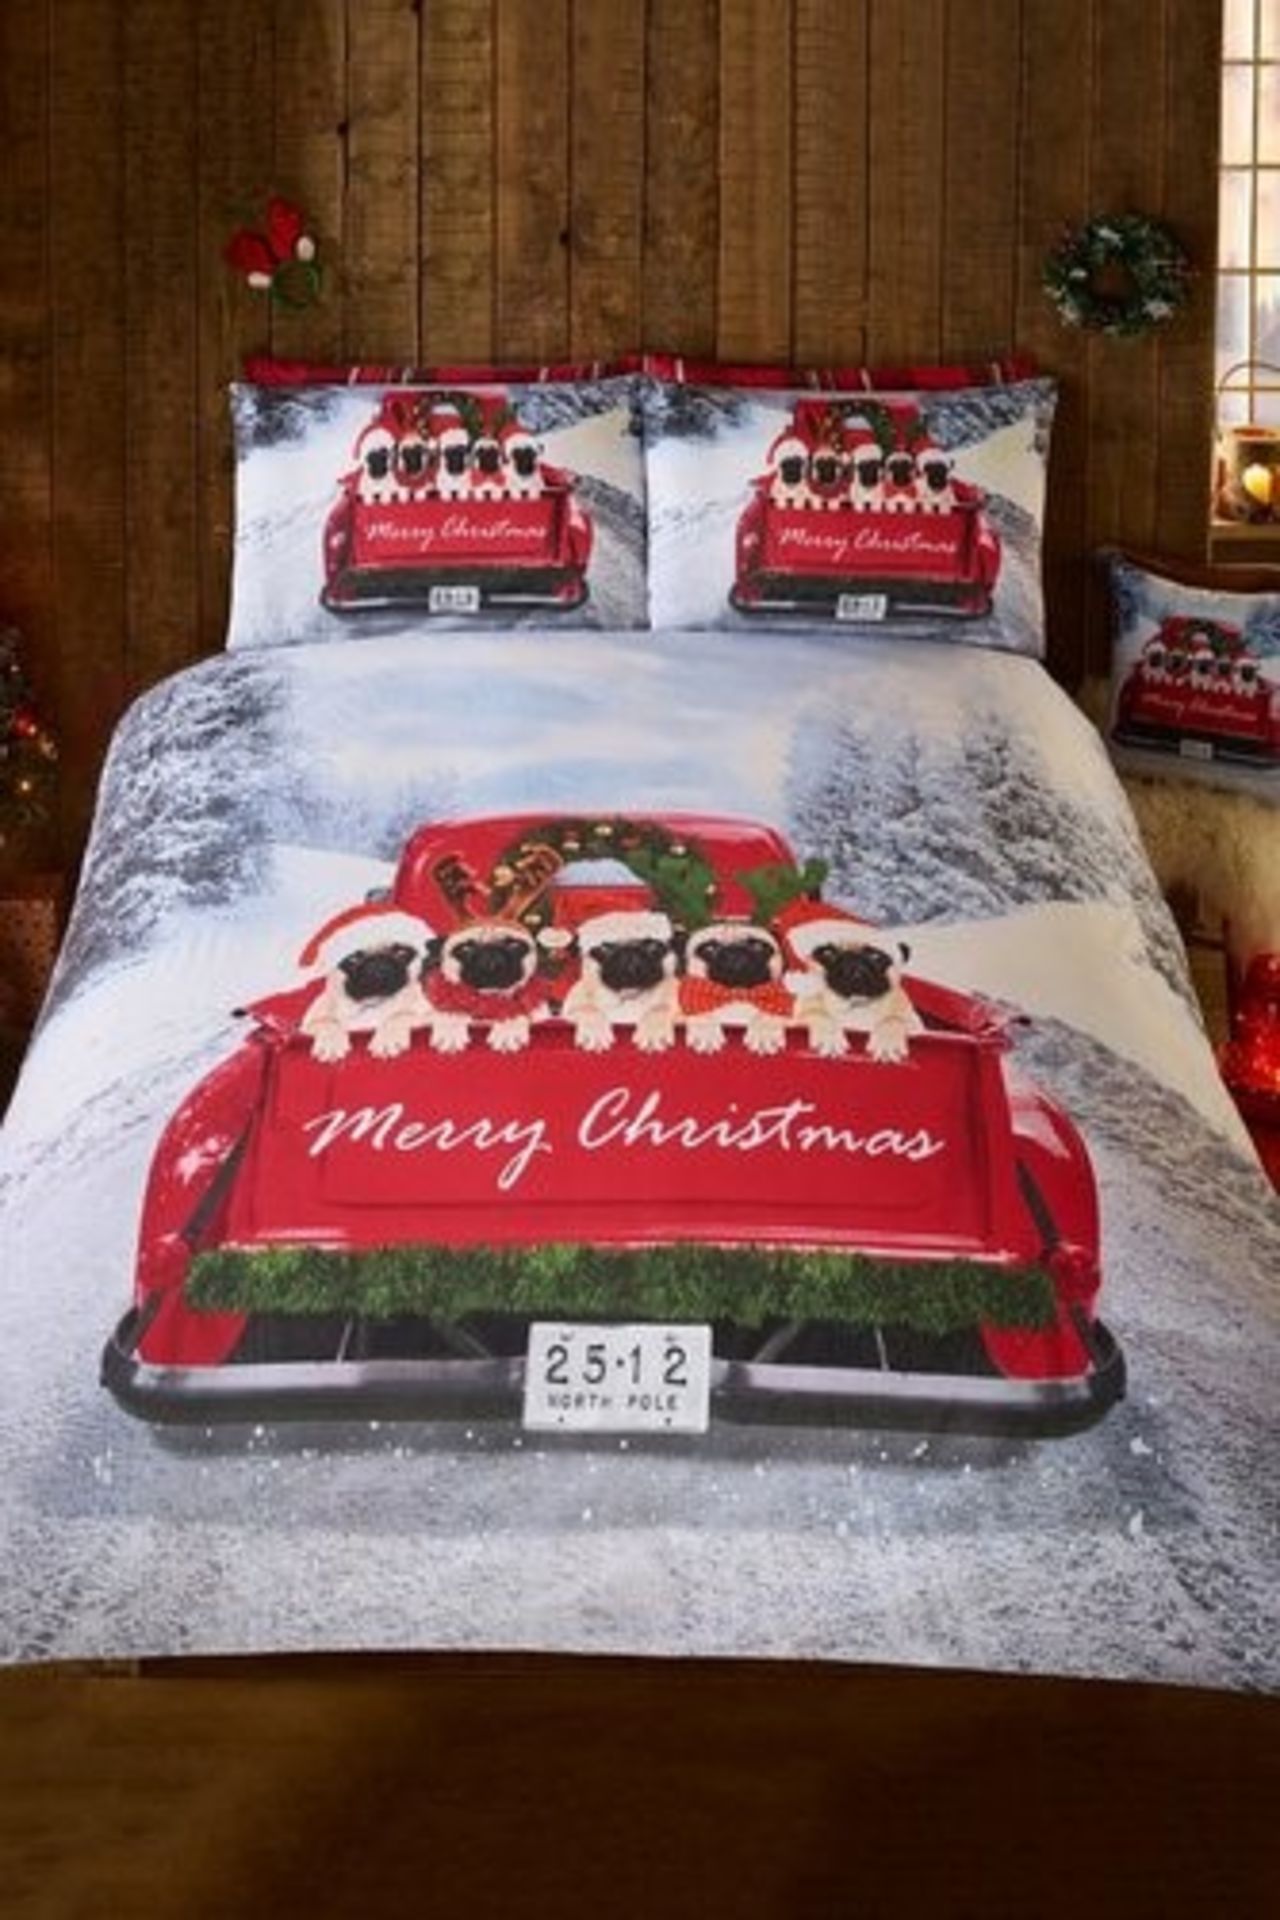 1 AS NEW BAGGED PUGS CHRISTMAS SINGLE QUILTED DUVET SET (VIEWING HIGHLY RECOMMENDED)